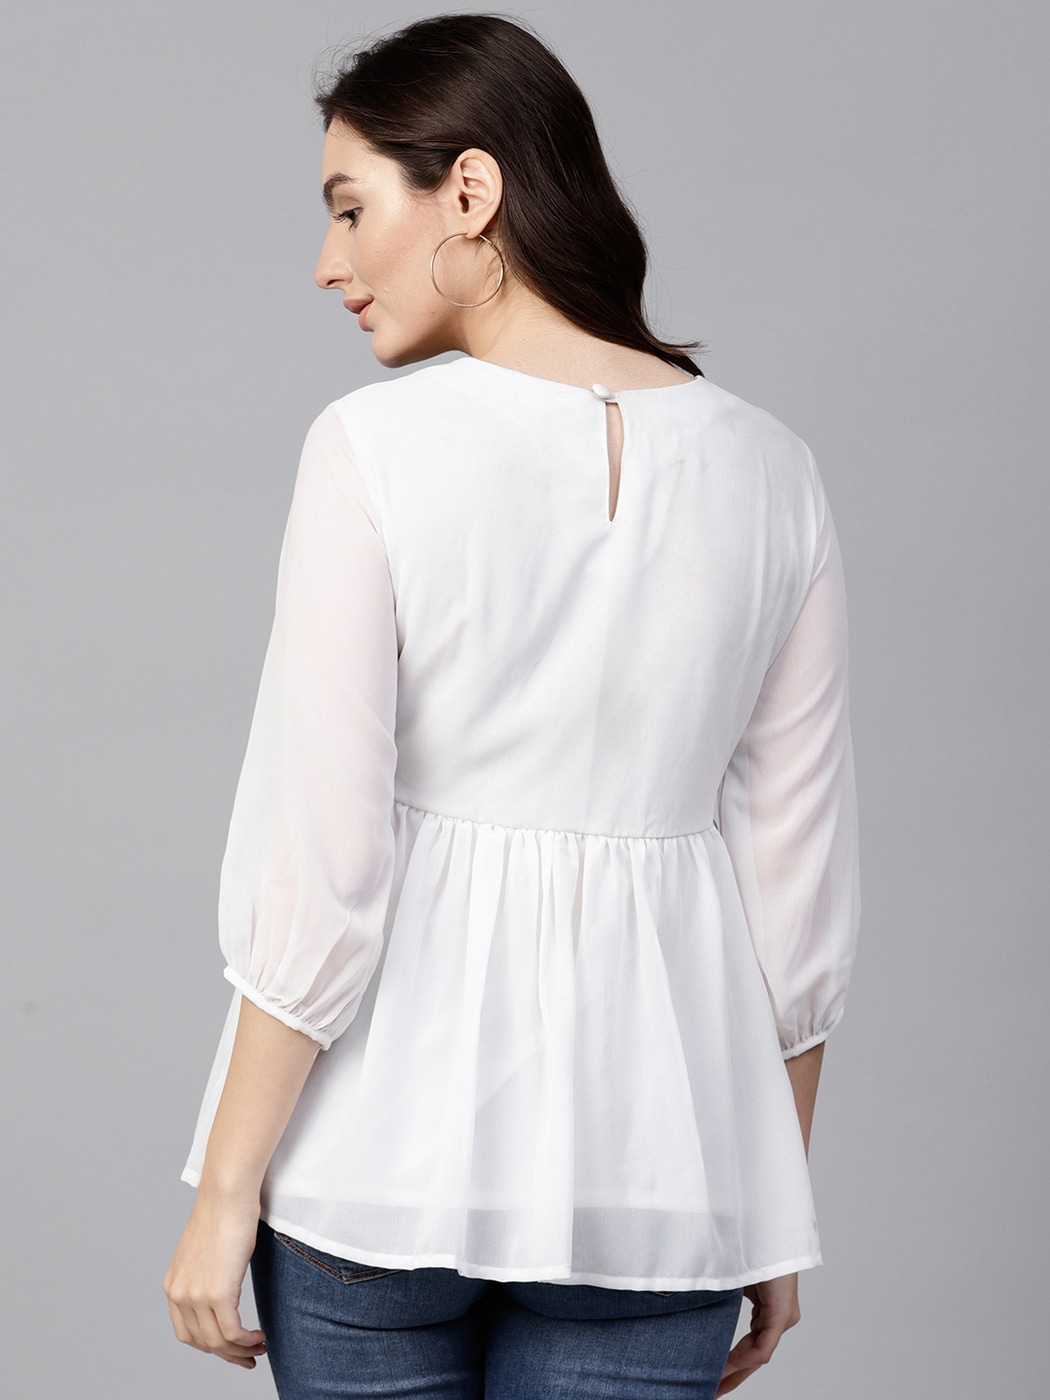 Buy White Tops for Women by PANNKH Online | Ajio.com